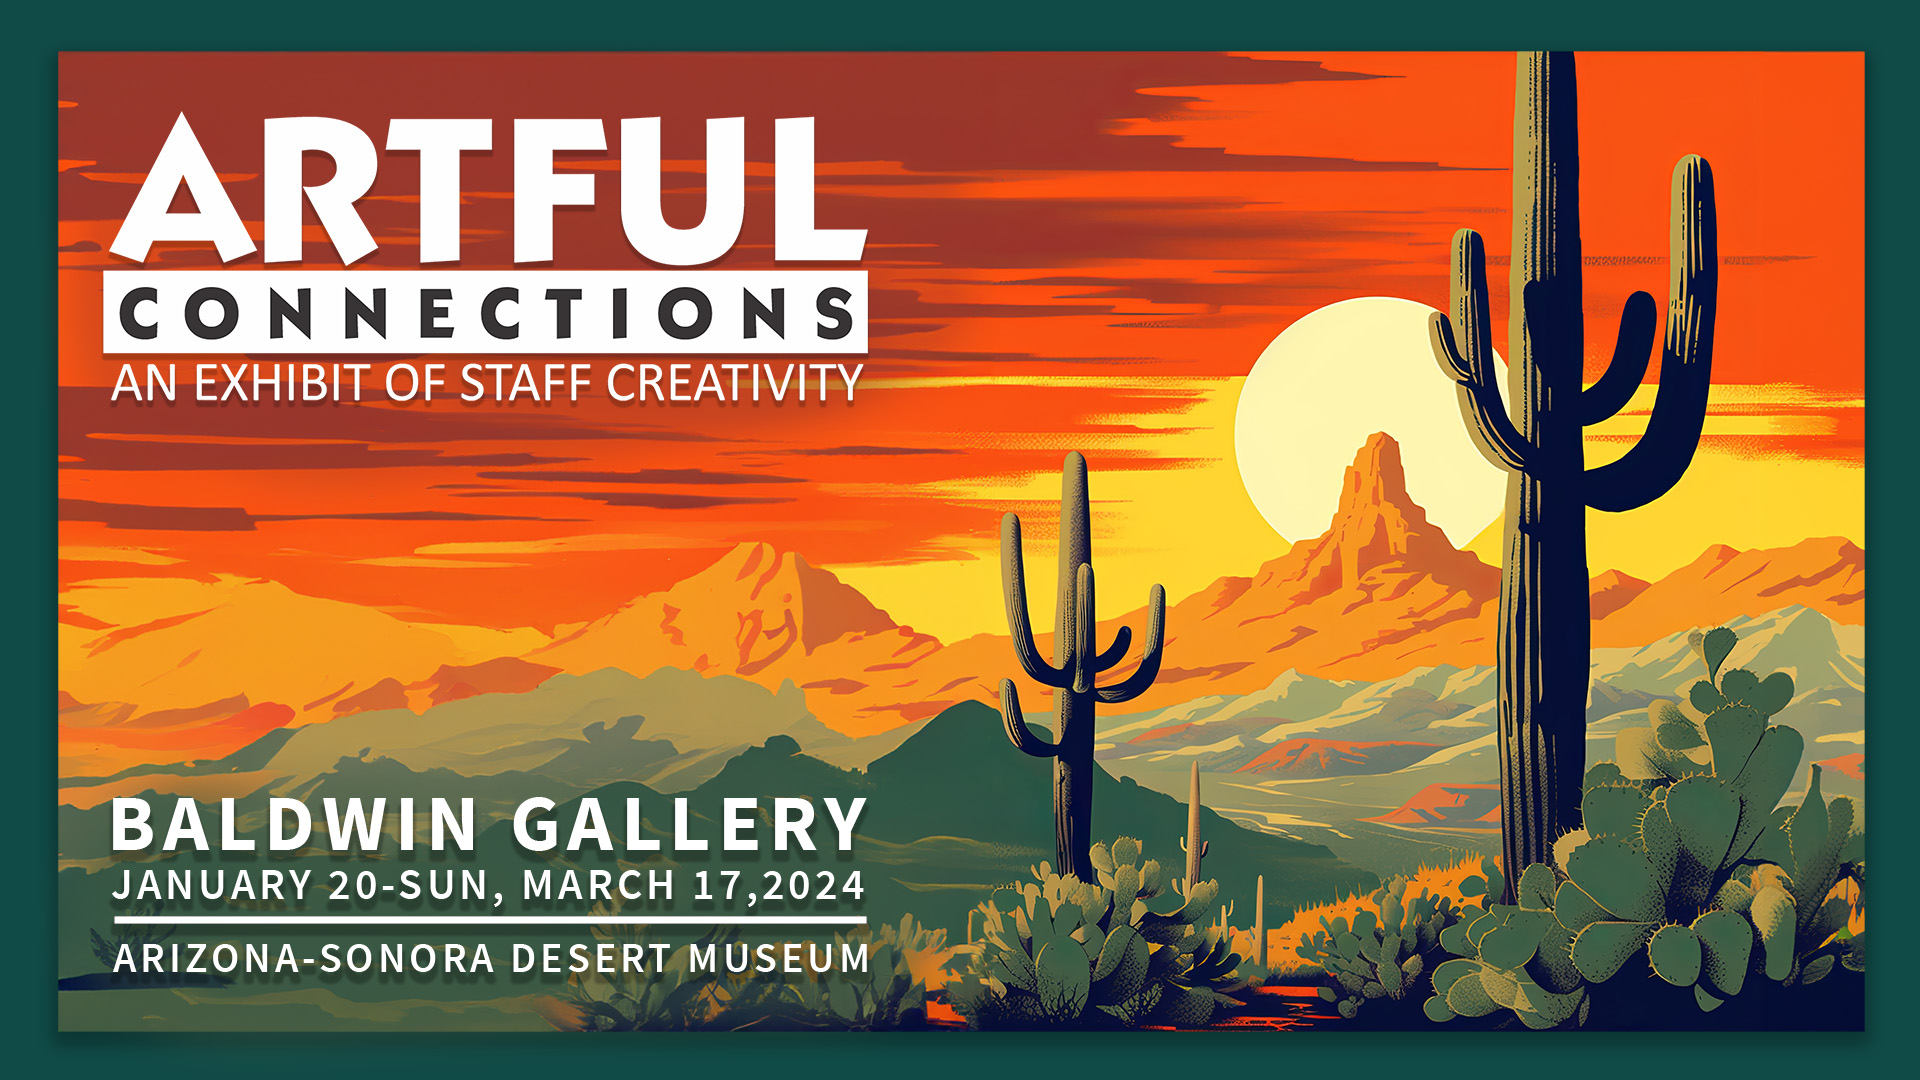 ARTFUL CONNECTIONS An Exhibit of Staff Creativity at the Arizona-Sonora Desert Museum